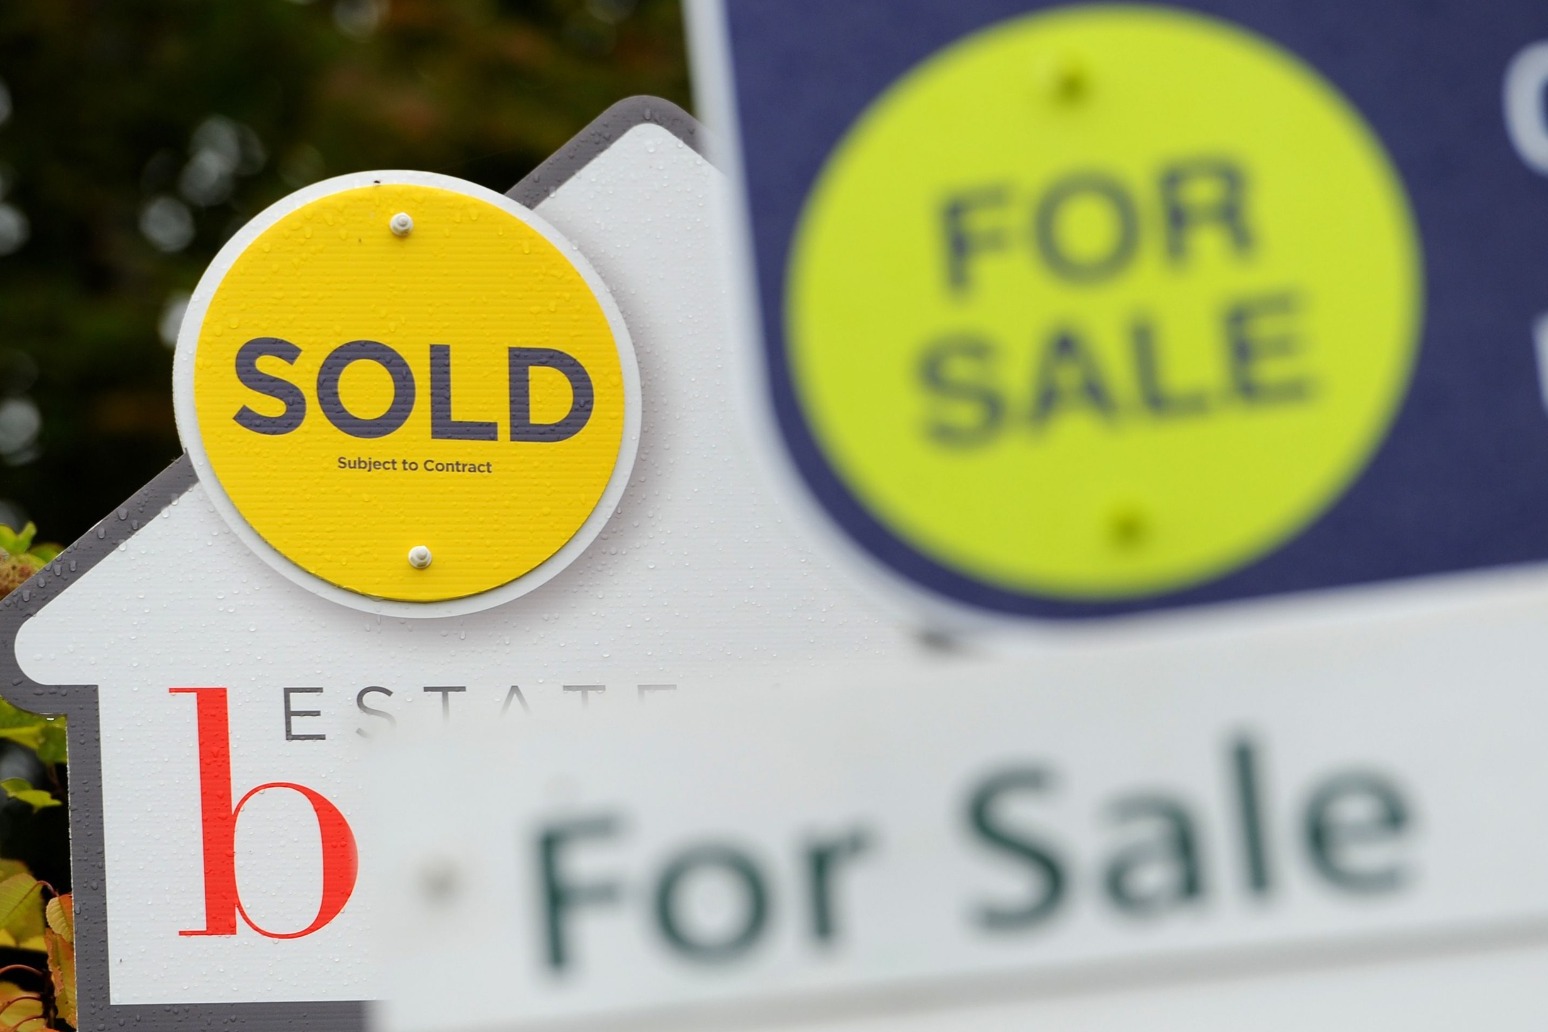 UK house prices fell in August at fastest annual rate since 2009 